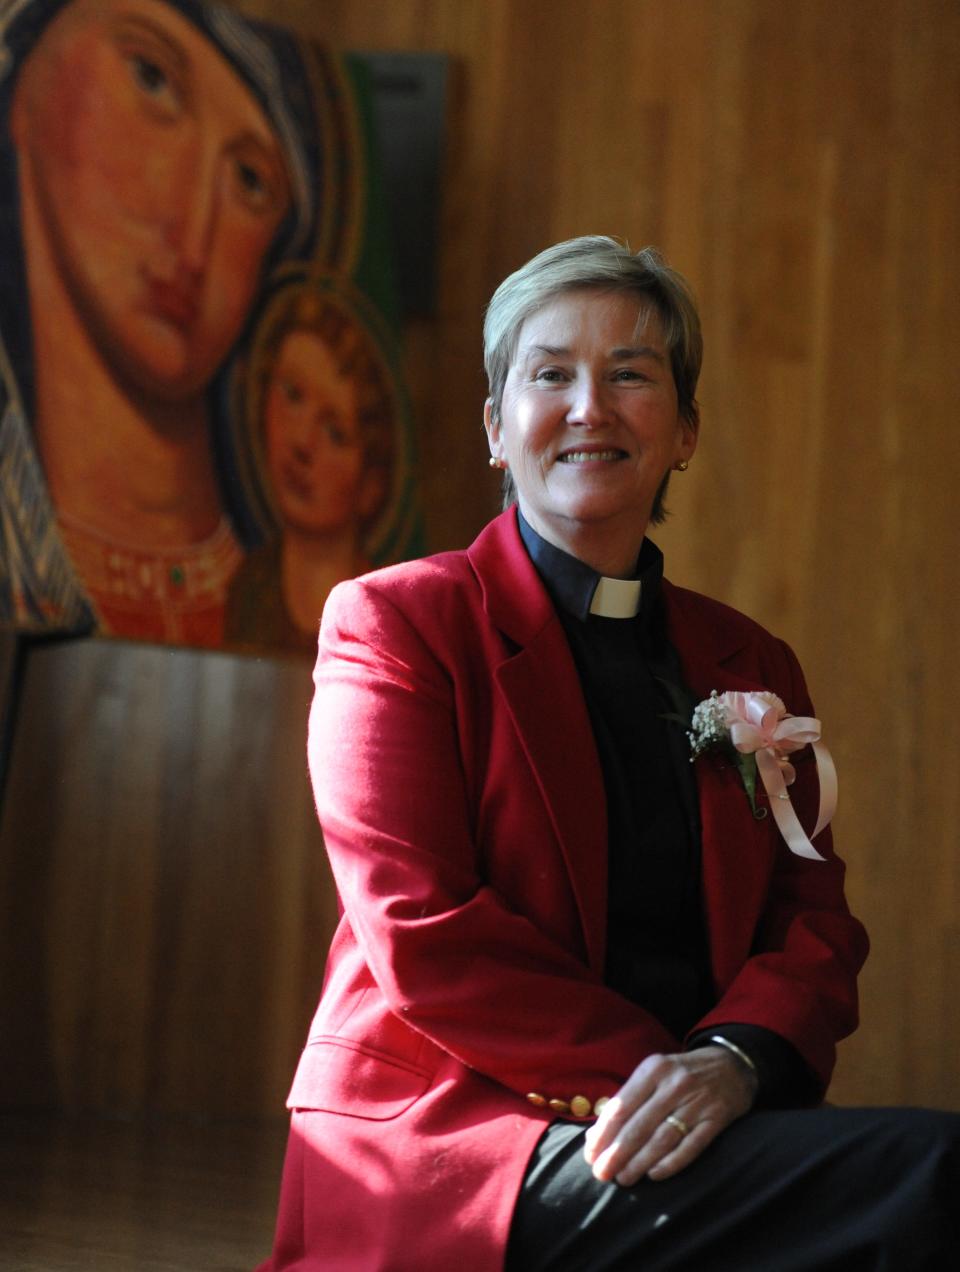 The Rev. Nell Fields is pastor of the Waquoit Congregational Church in Falmouth. The church is bringing Spanish-speaking community members to Joint Base Cape Cod to help migrants communicate their needs and their stories, Fields said.